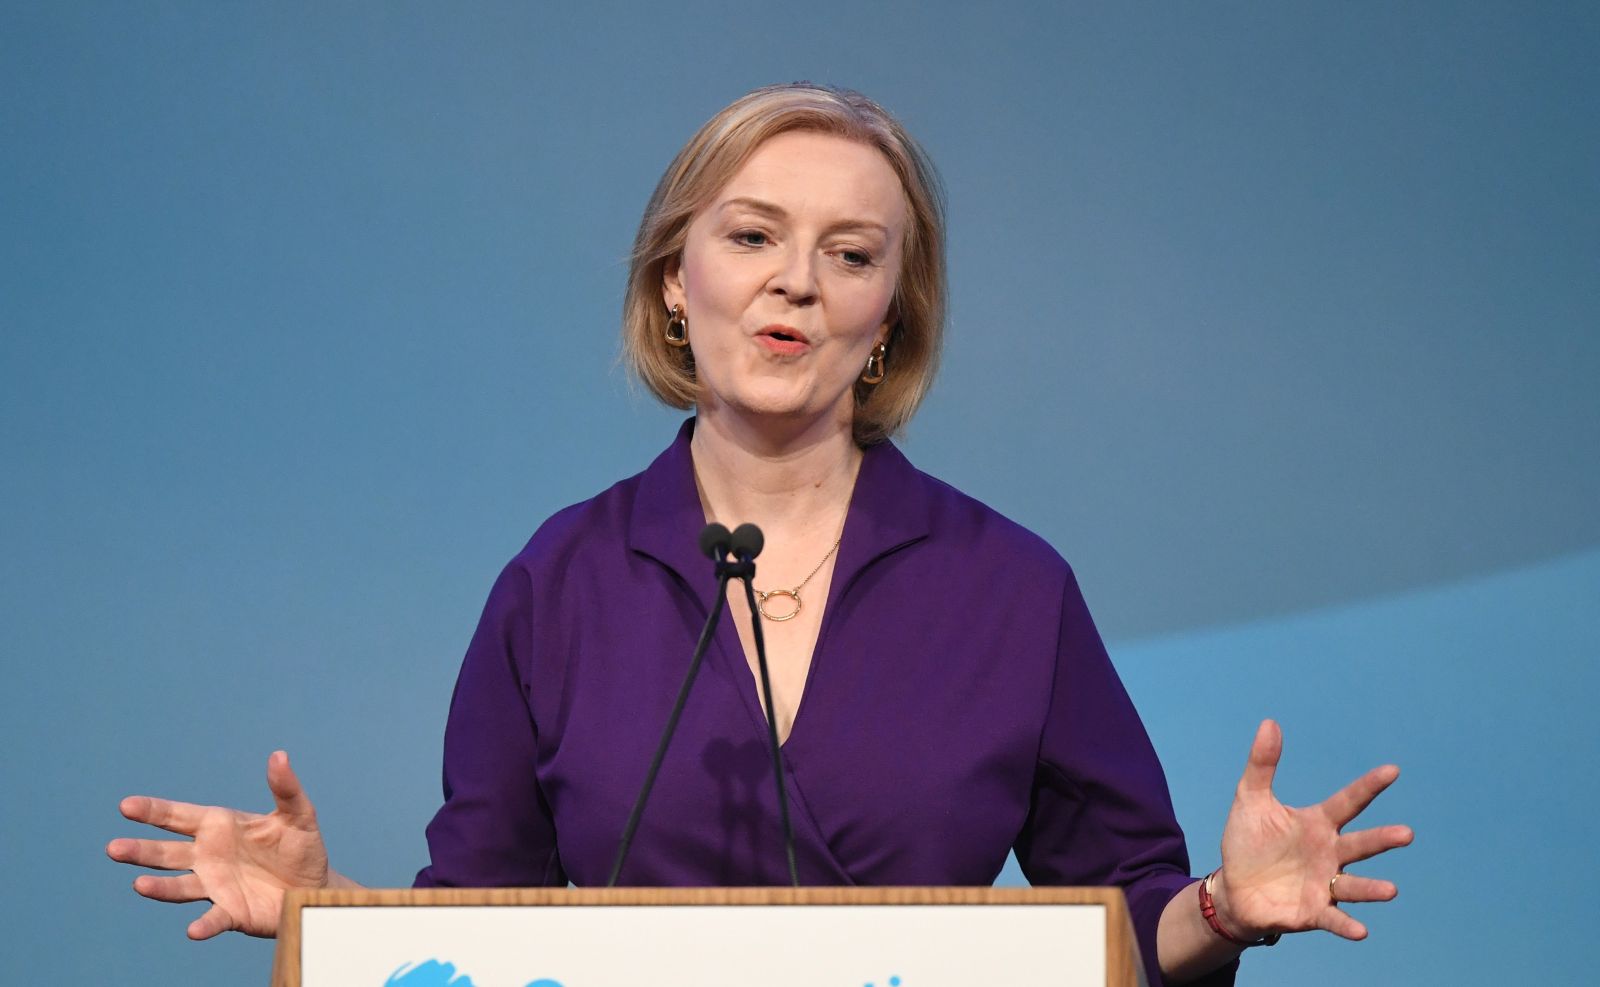 epa10161300 New leader of the Conservative Party Liz Truss speaks after the announcement of her win at the Queen Elizabeth II Centre, in London, Britain, 05 September 2022. Truss has won the vote held among Conservative Party members for the new Tory leader and British Prime Minister, the chairman of the 1922 Committee announced on 05 September 2022.  EPA/NEIL HALL